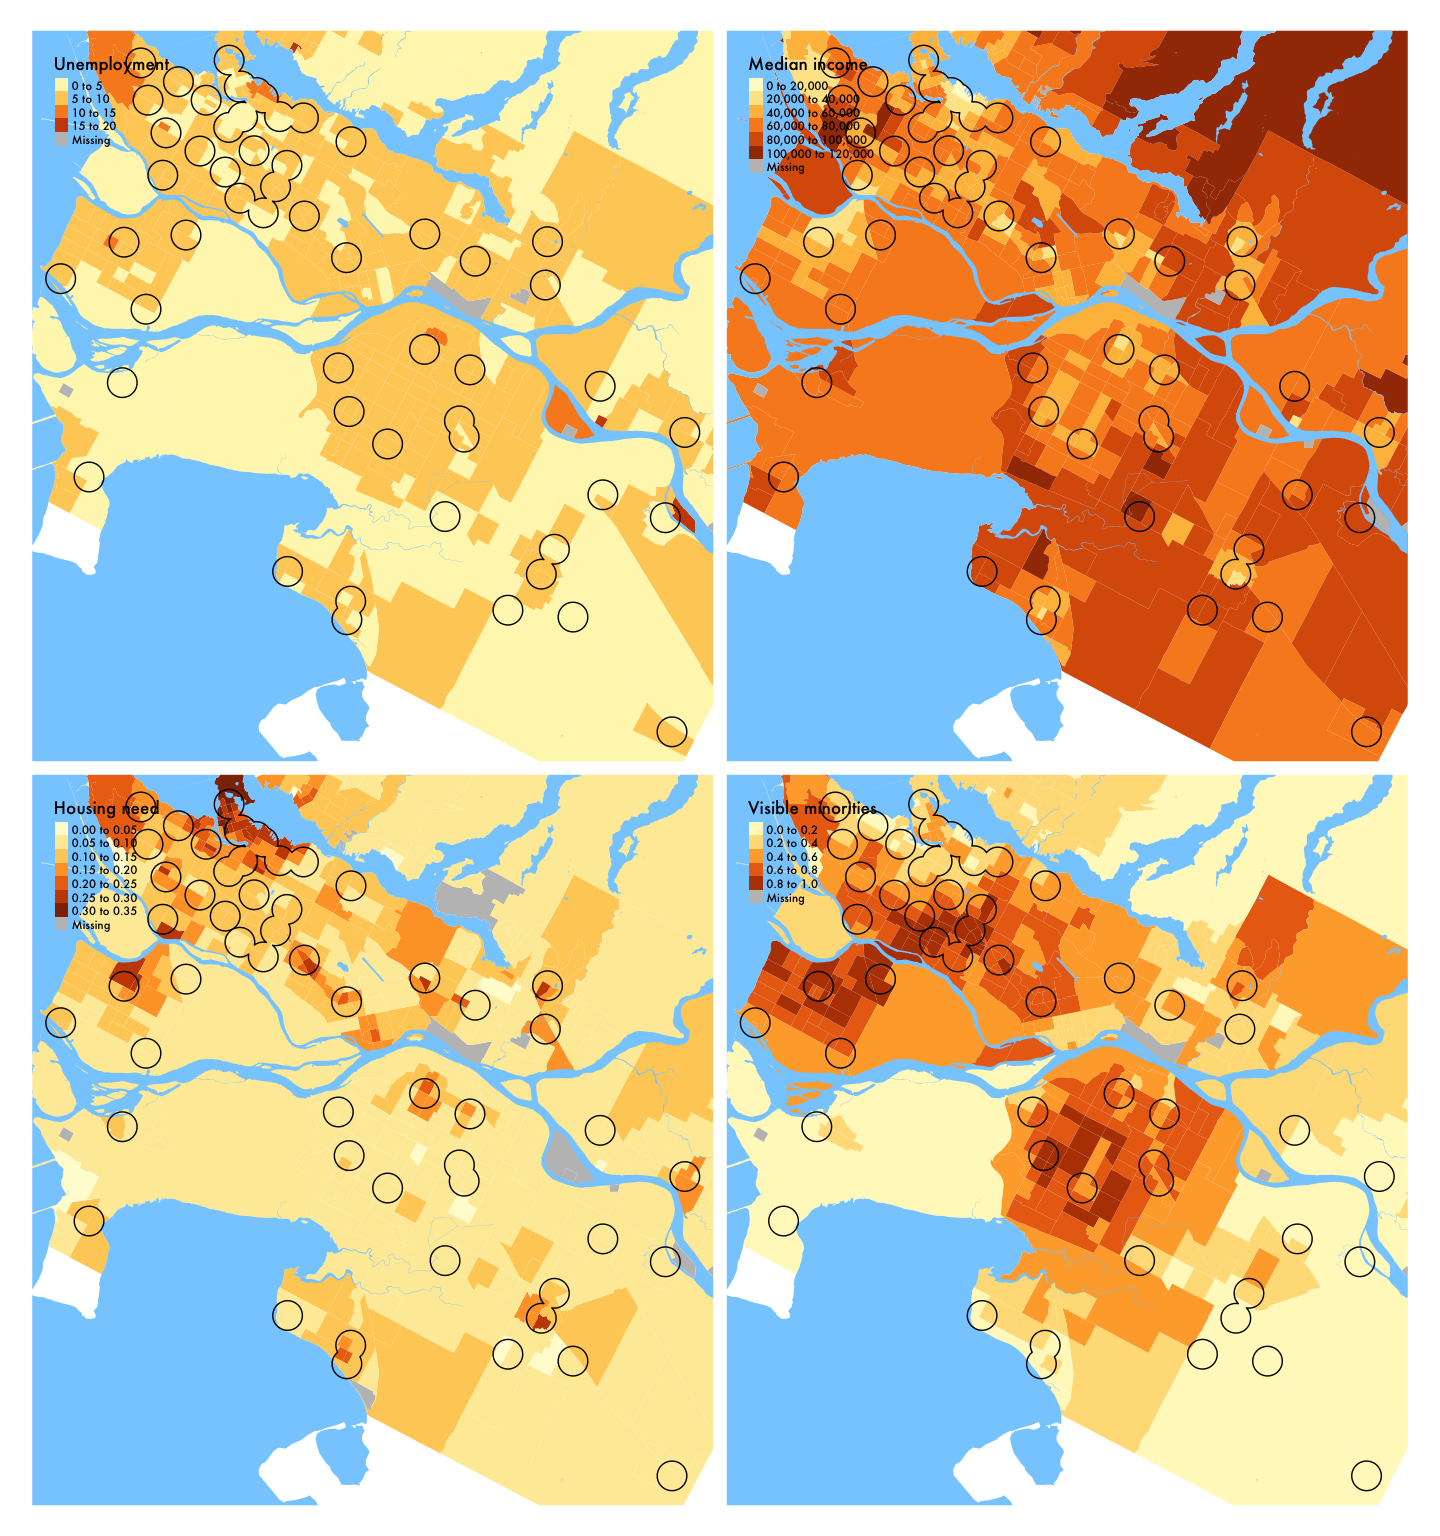 Demographic variables in Vancouver (library service area), 2016